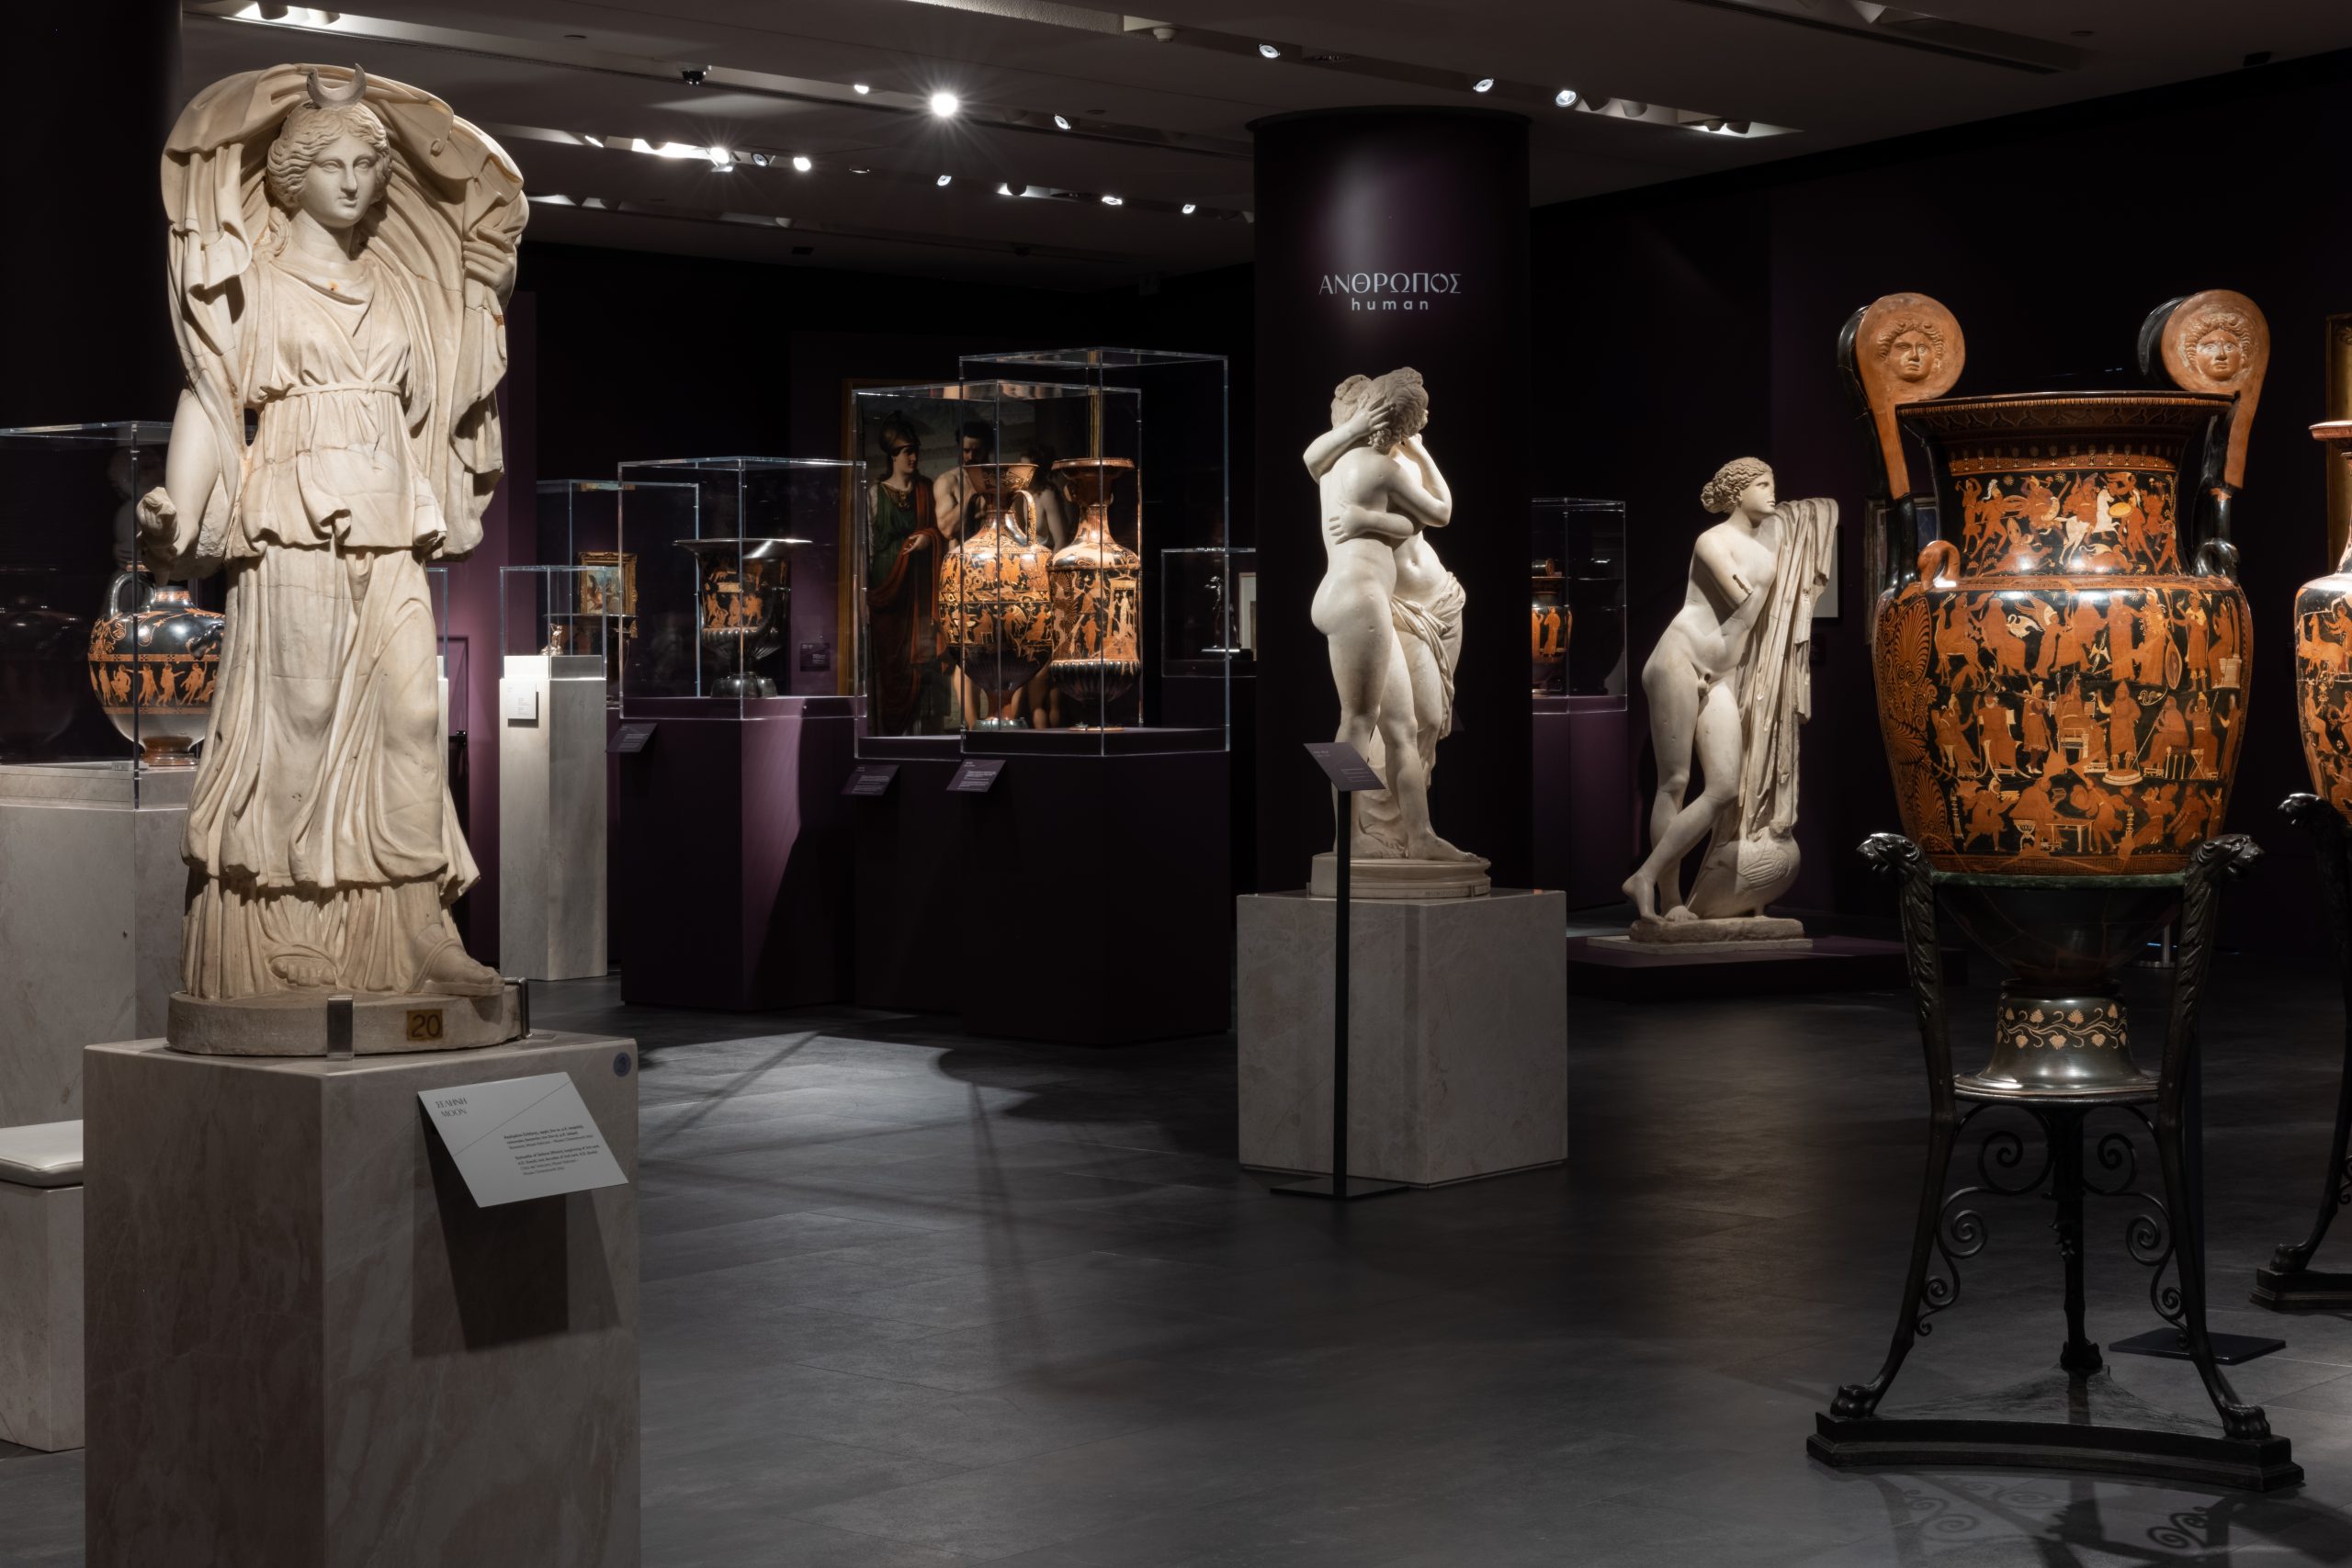 New Exhibition at Acropolis Museum: NoHMATA ‘Meanings’